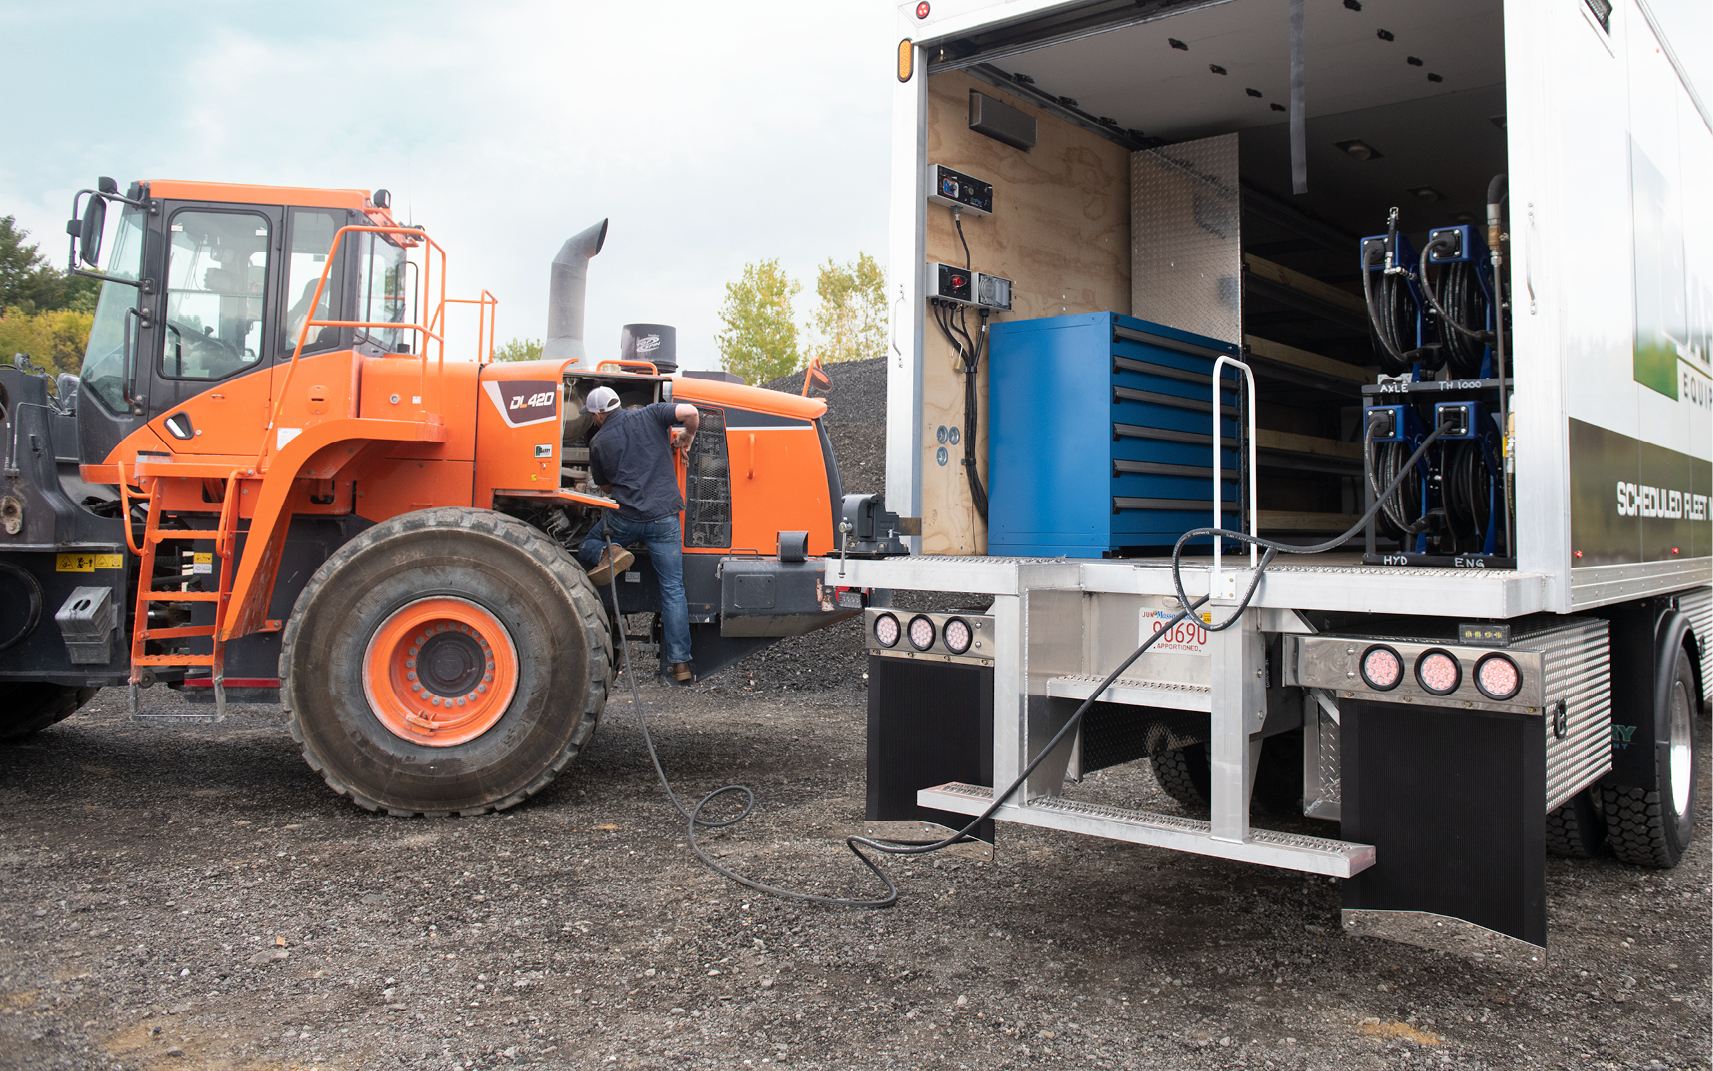 A heavy equipment service technician performs work in the field using a mobile lubrication truck.